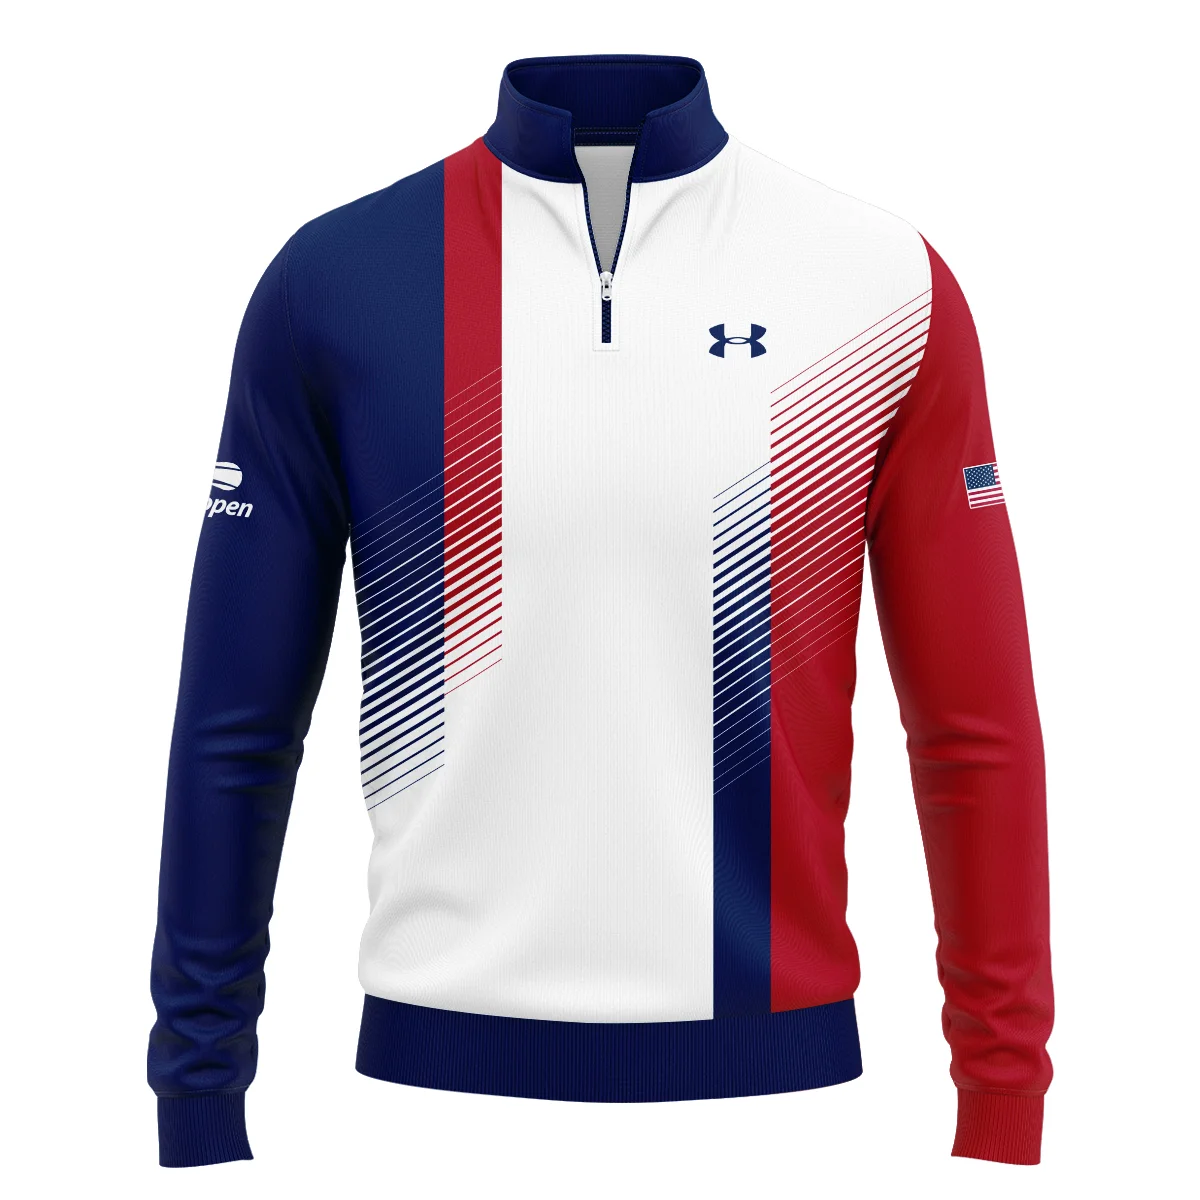 Under Armour Blue Red Straight Line White US Open Tennis Champions Quarter-Zip Jacket Style Classic Quarter-Zip Jacket